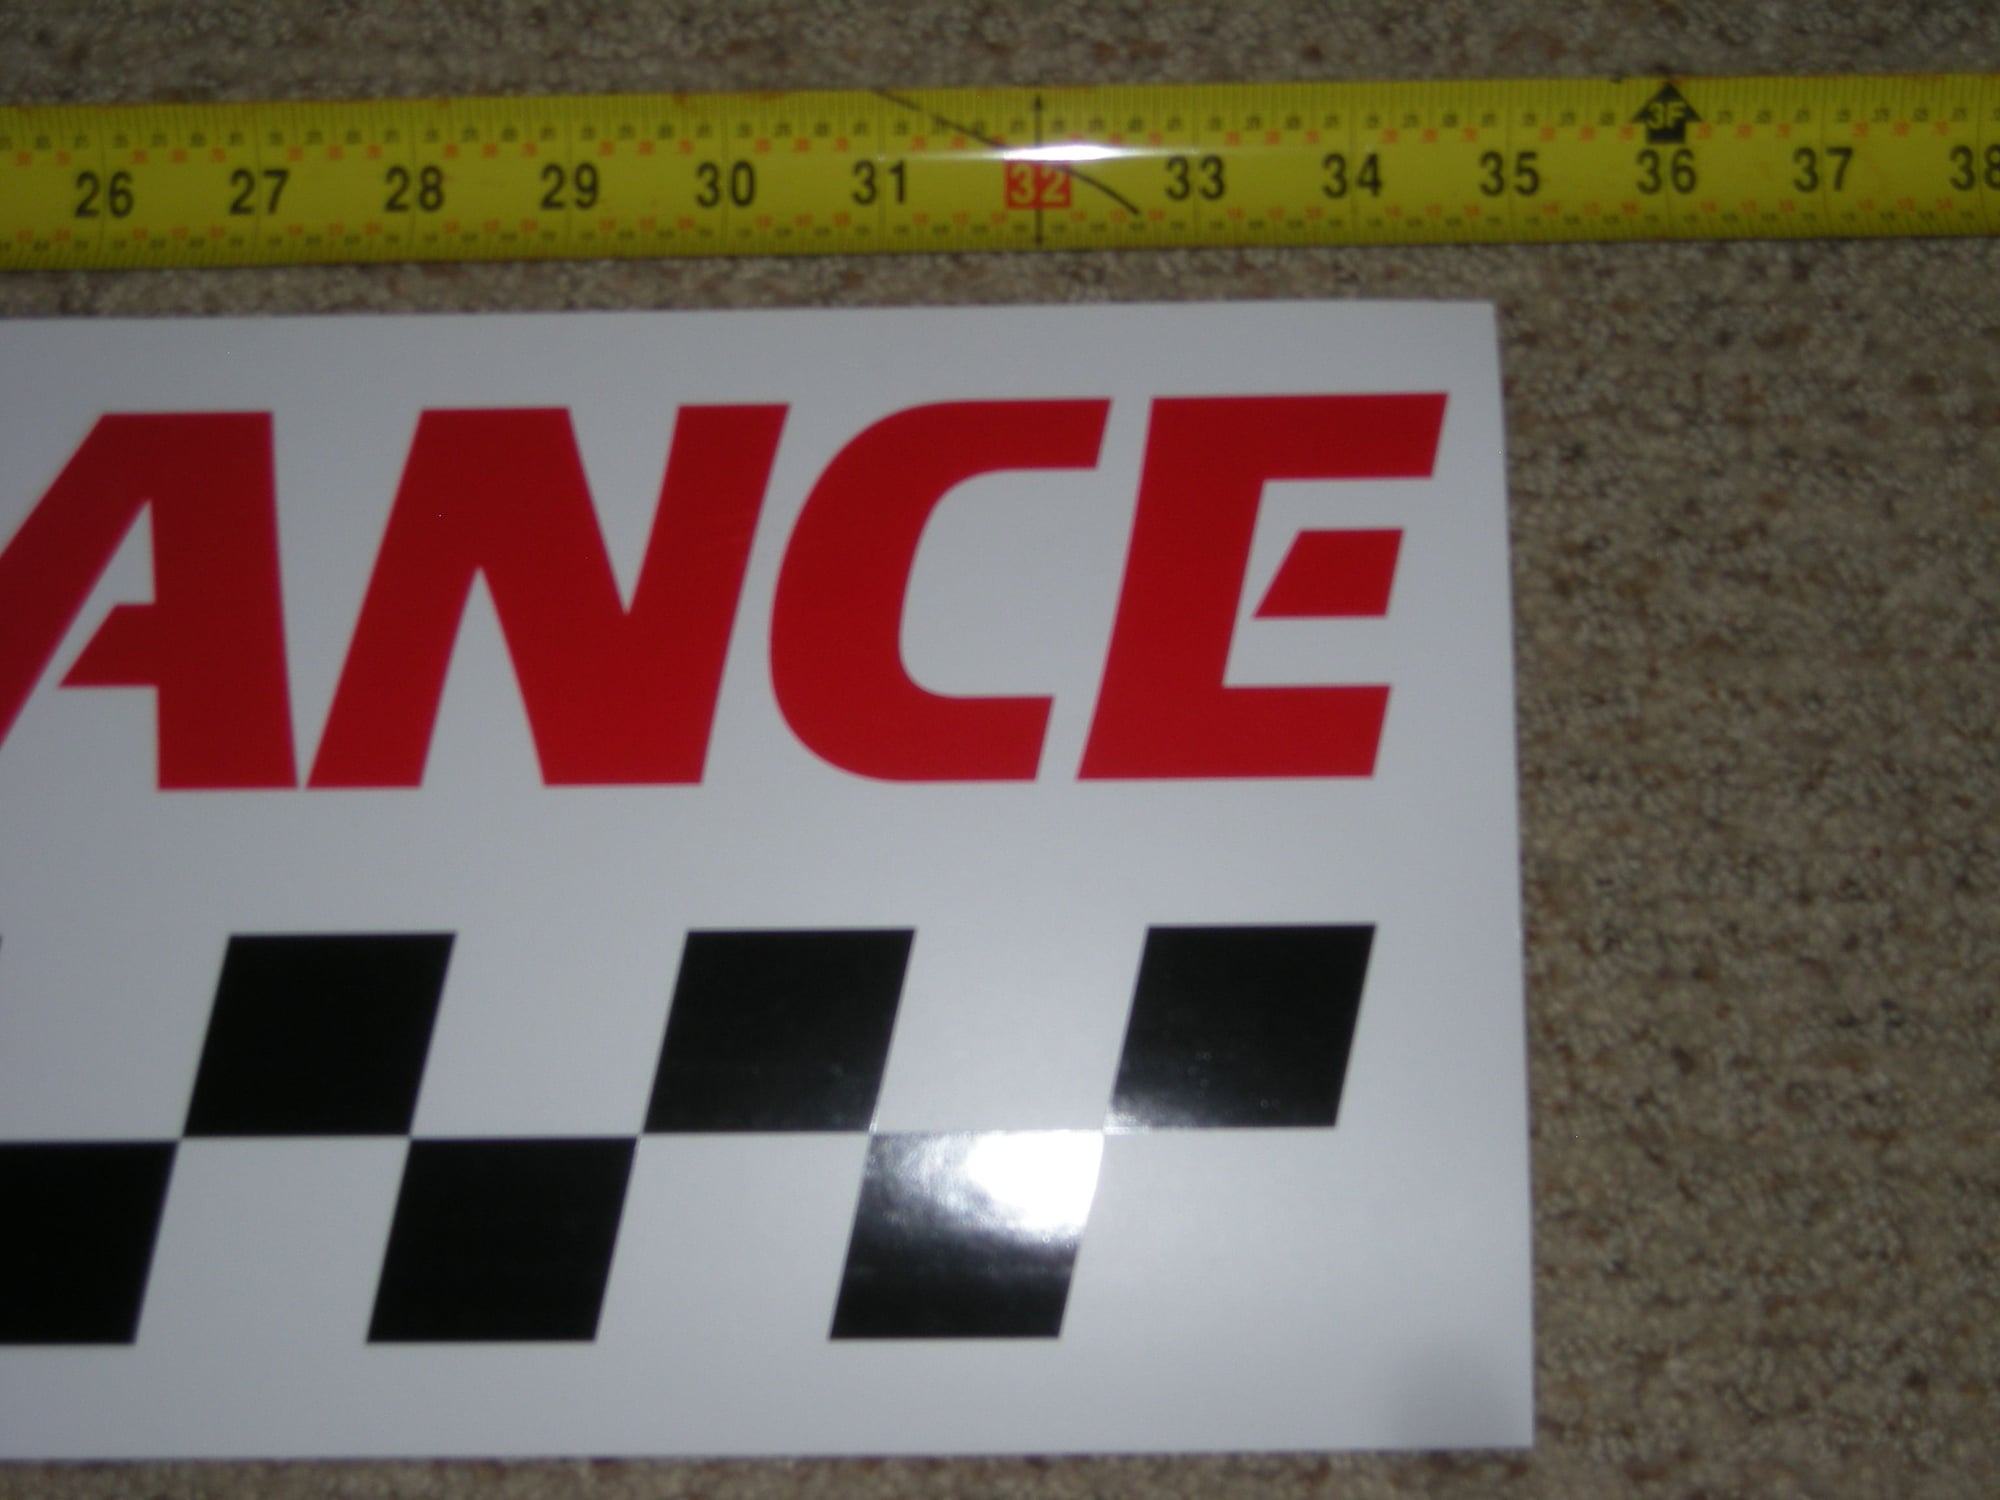  - 3 foot gm performance parts decal - Hazle Township, PA 18202, United States